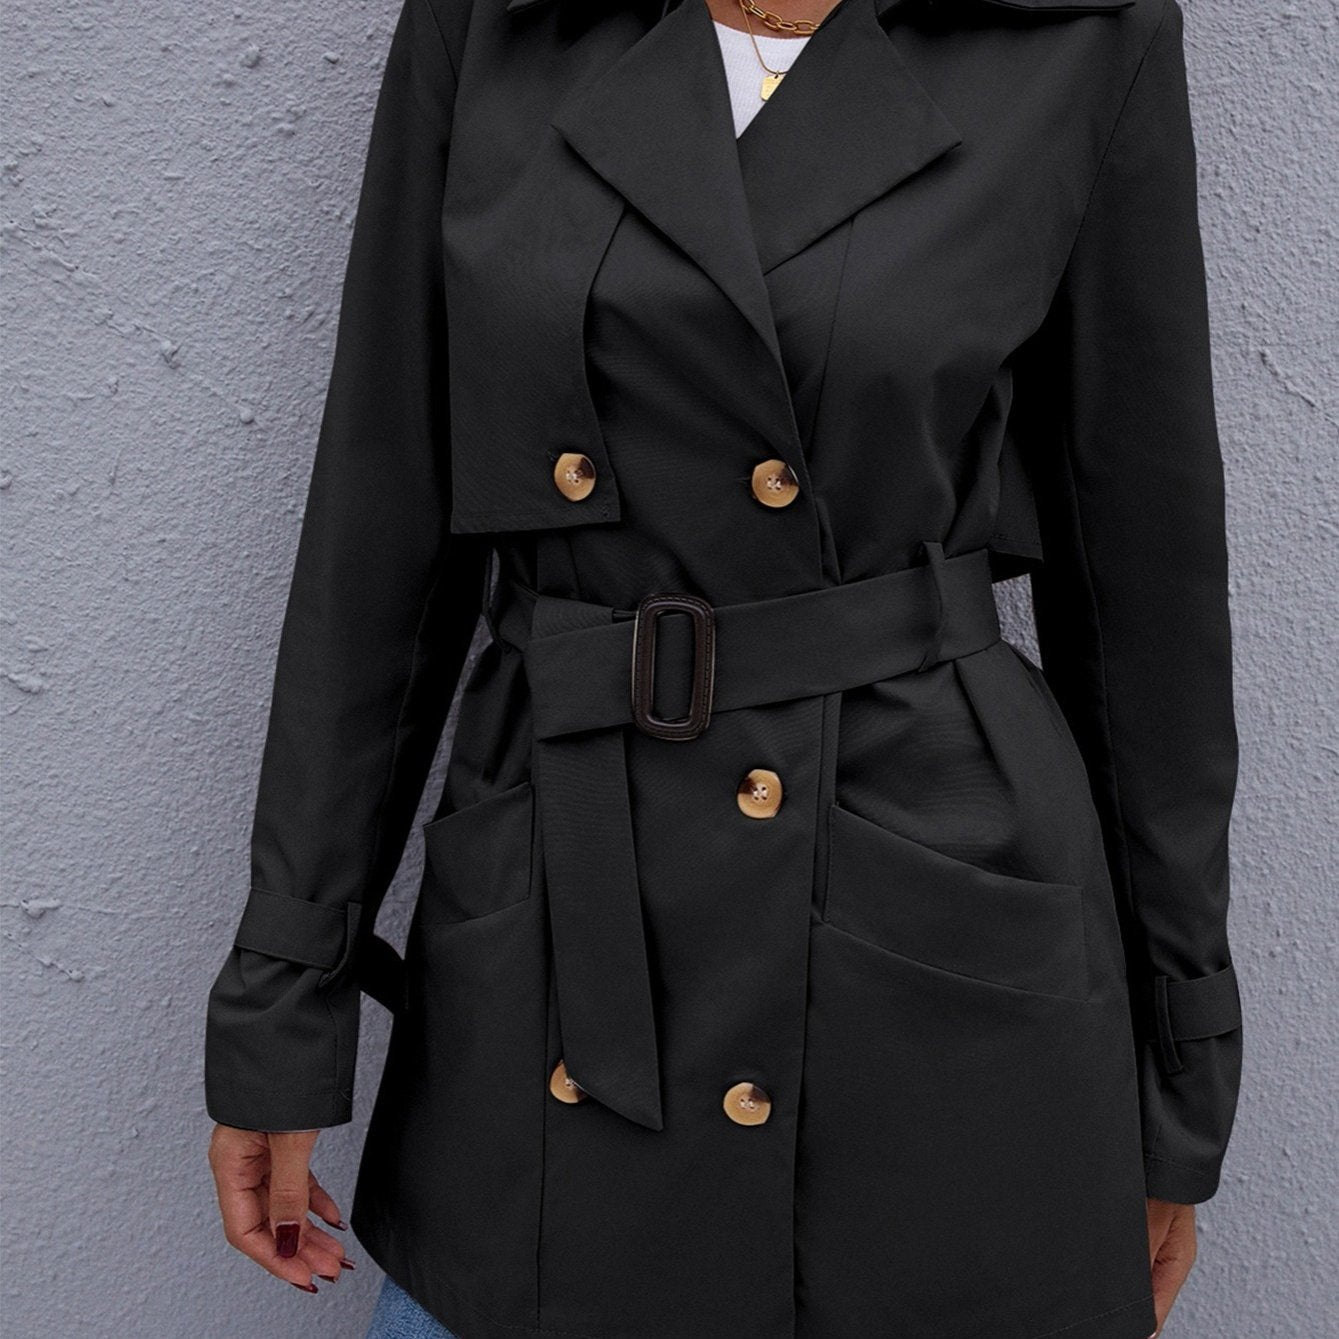 vlovelaw  Double Breasted Long Trench Coat, Long Sleeve Windproof Classic Lapel Slim Belted Outerwear, Women's Clothing